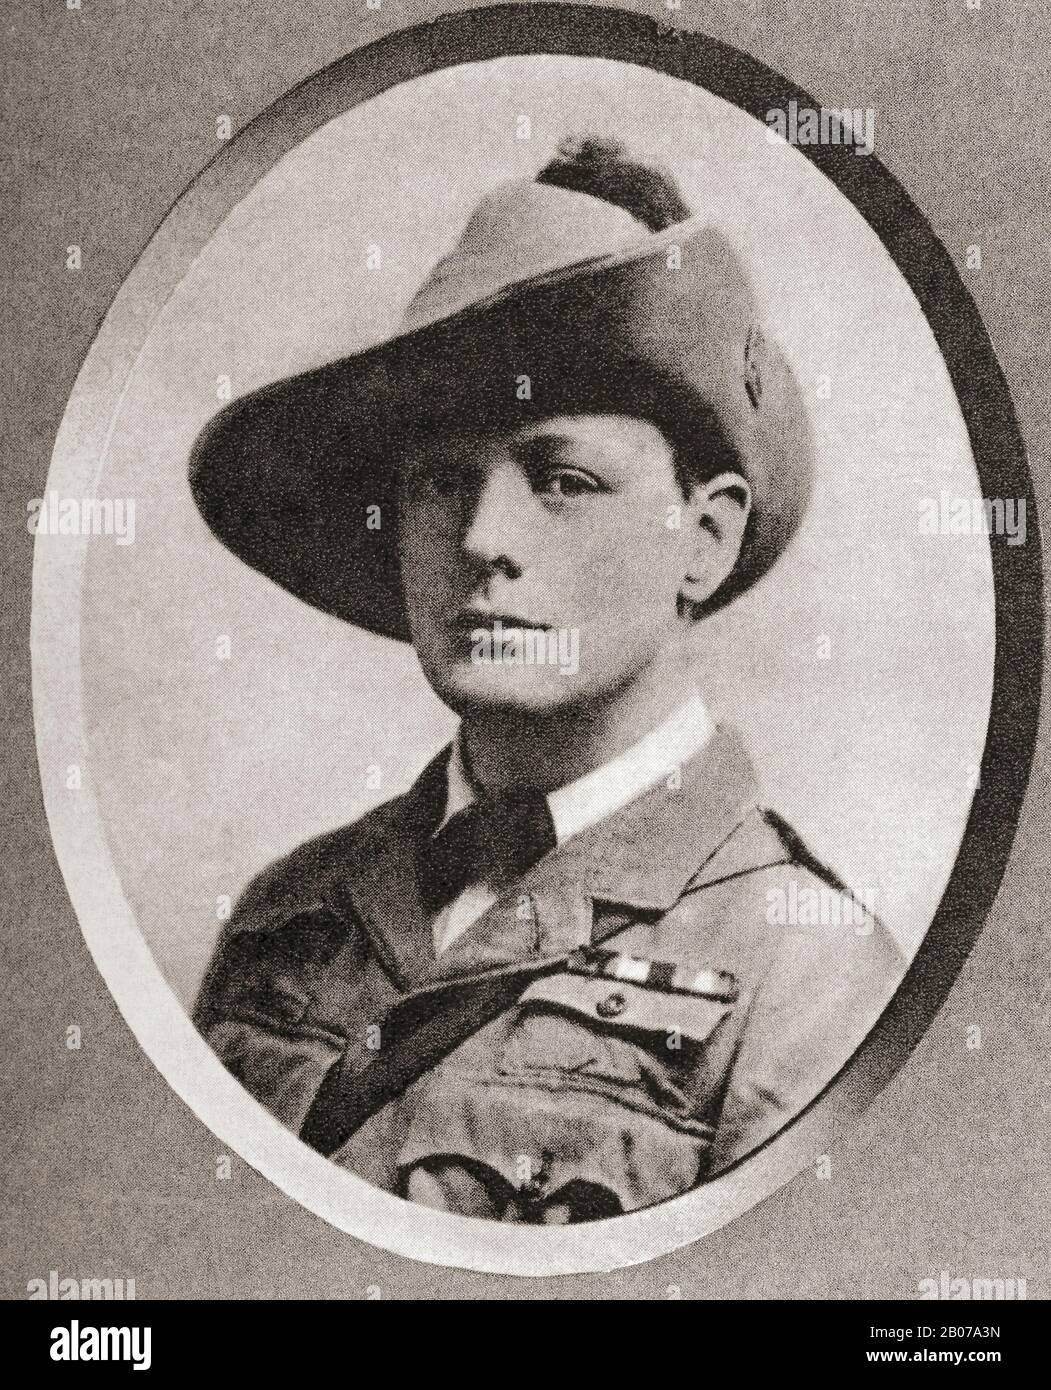 Winston Churchill, seen here as a lieutenant in the South African Light Horse, 1899.   Sir Winston Leonard Spencer-Churchill, 1874 – 1965. British politician, army officer, writer and twice Prime Minister of the United Kingdom. Stock Photo